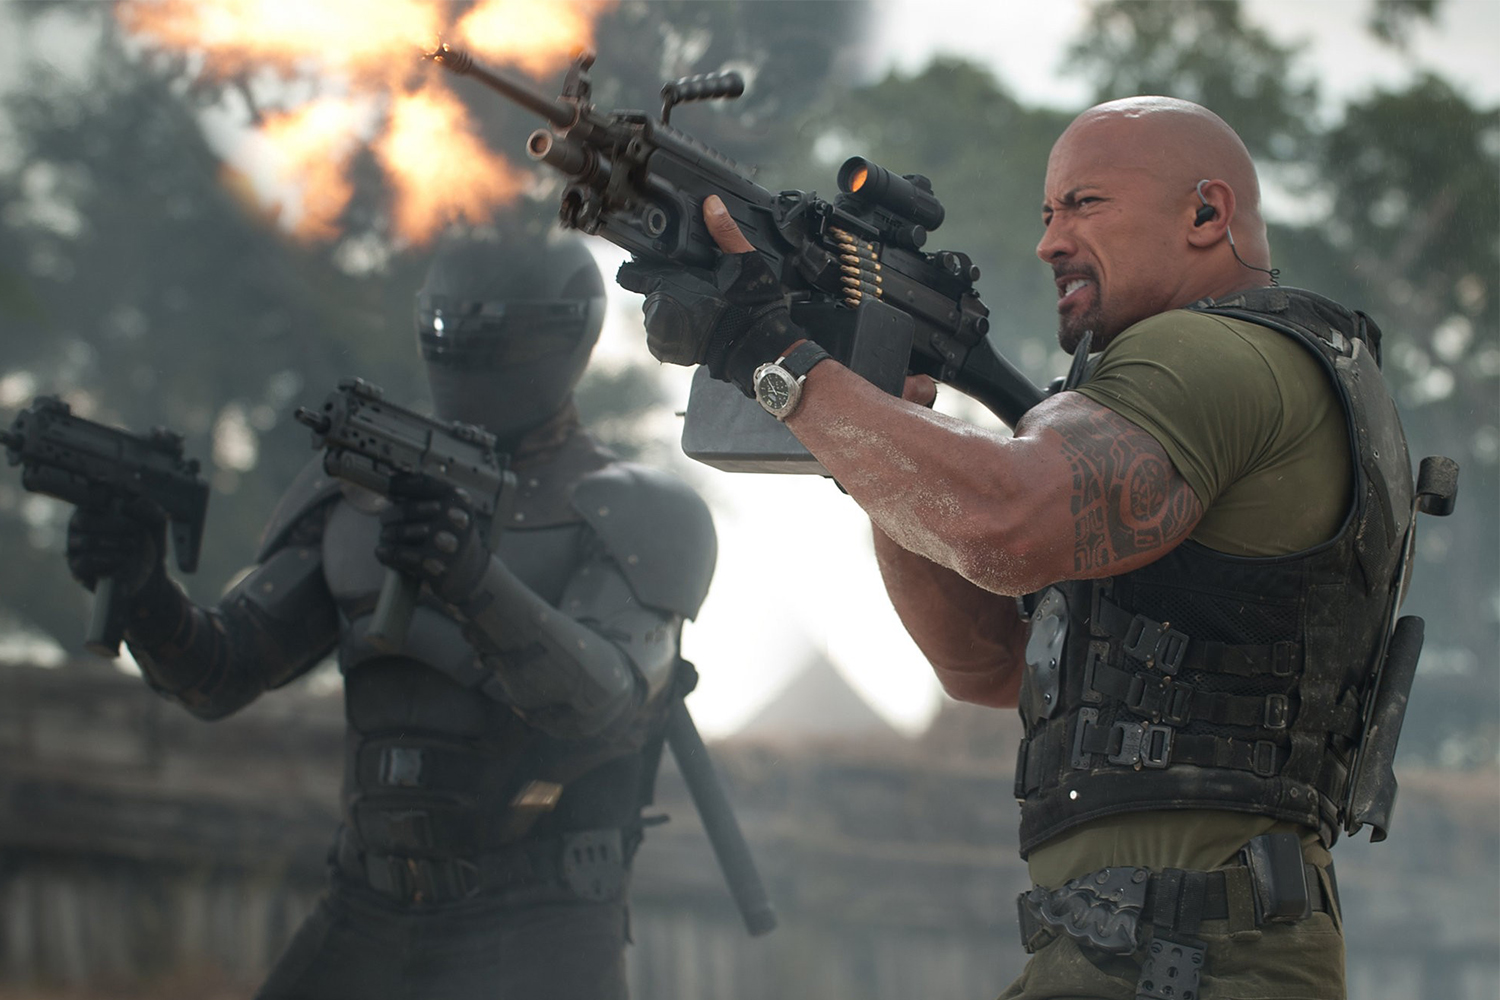 A Call Of Duty Movie Starring Dwayne ‘The Rock’ Johnson Is Reportedly In The Works